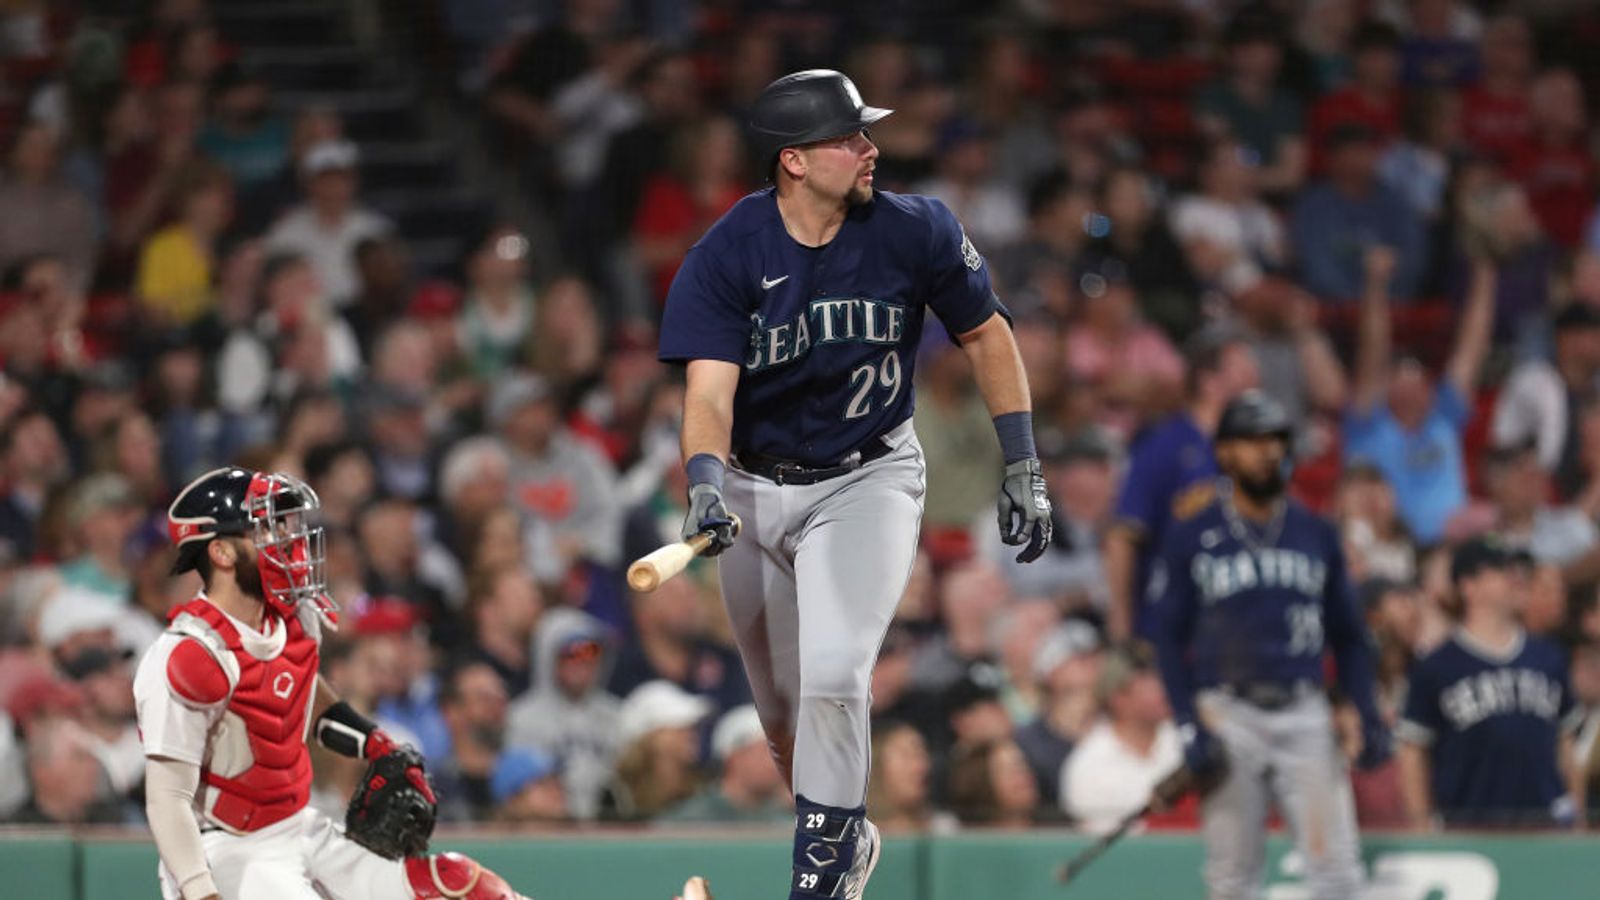 BSJ Game Report: Mariners 10, Red Sox 1 - Boston drop fourth in a